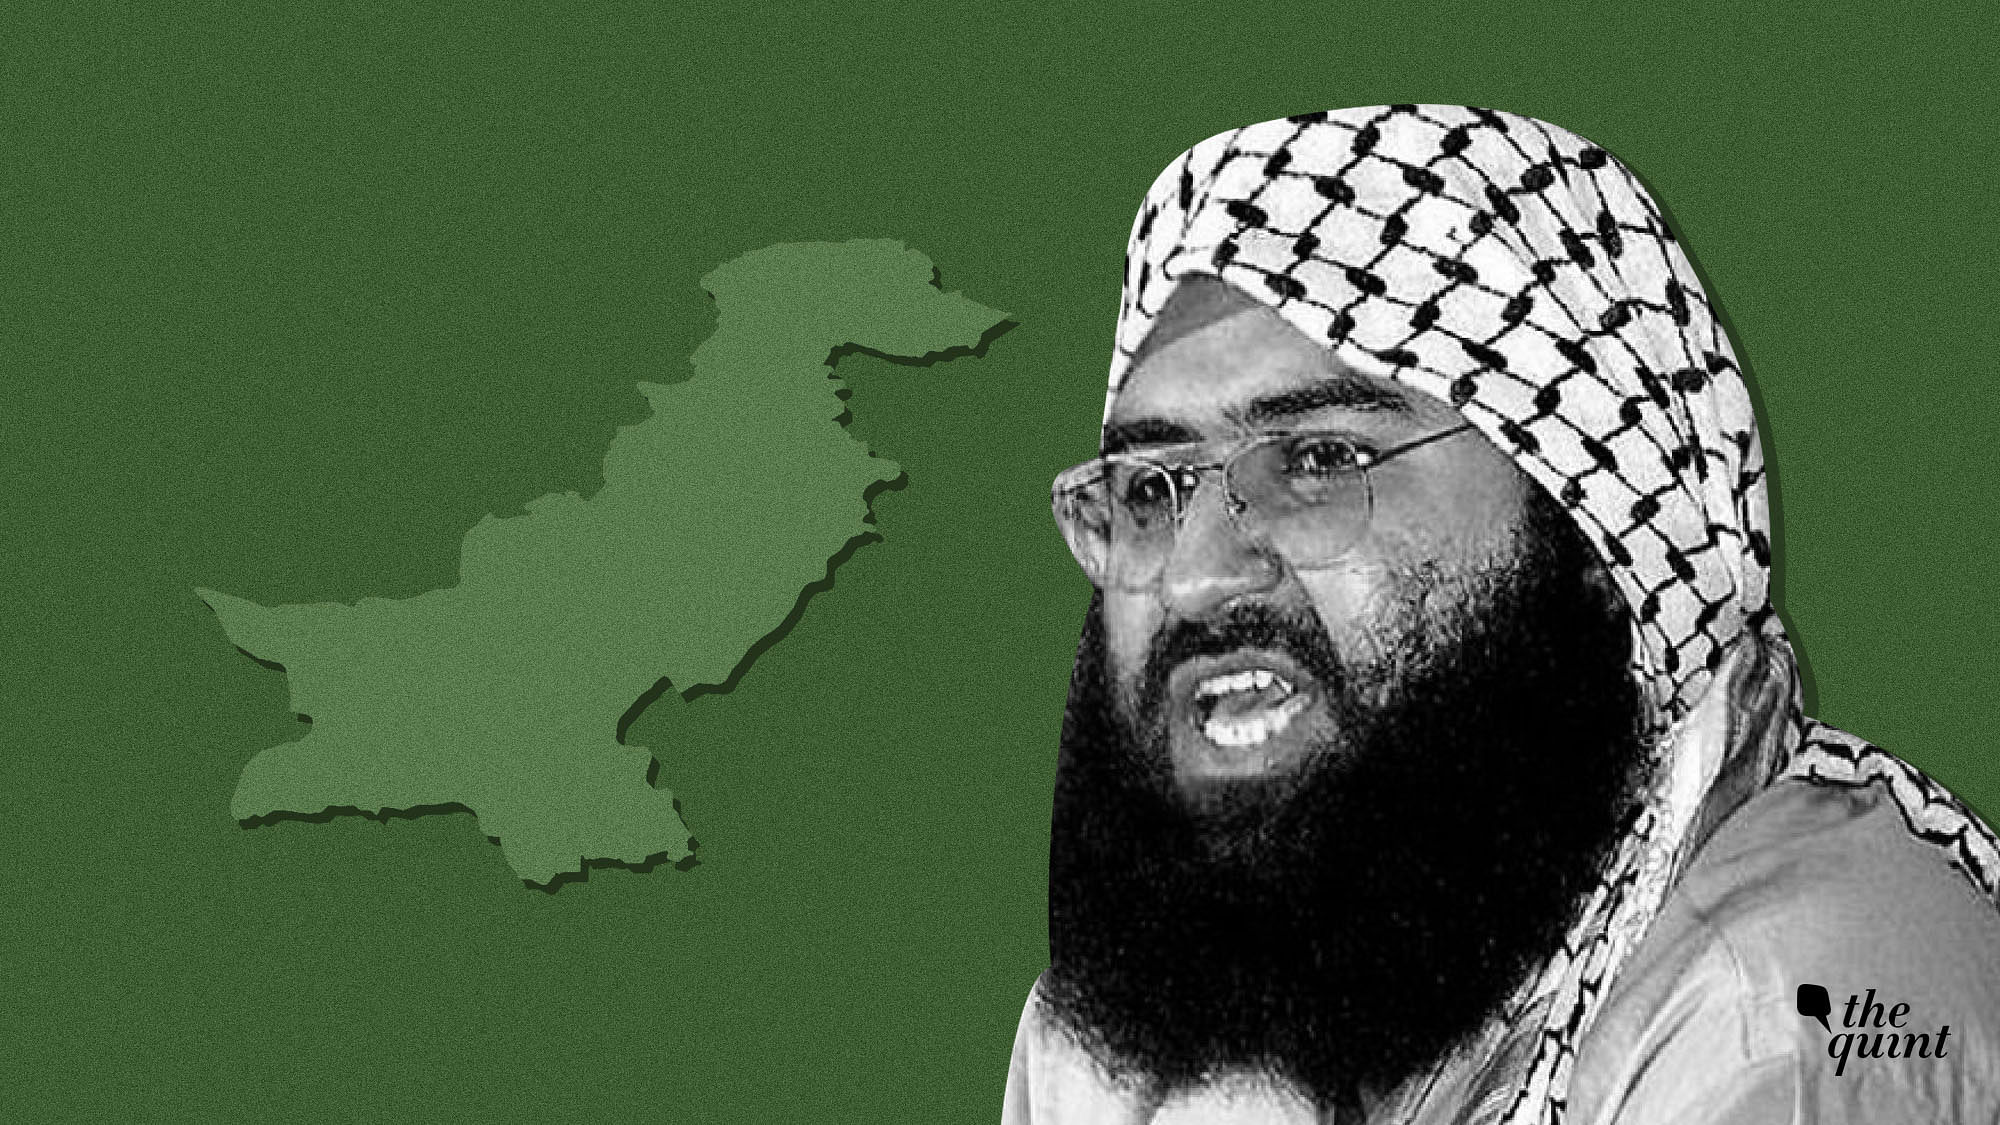 Image of JeM chief Masood Azhar and map of Pakistan, used for representational purposes.